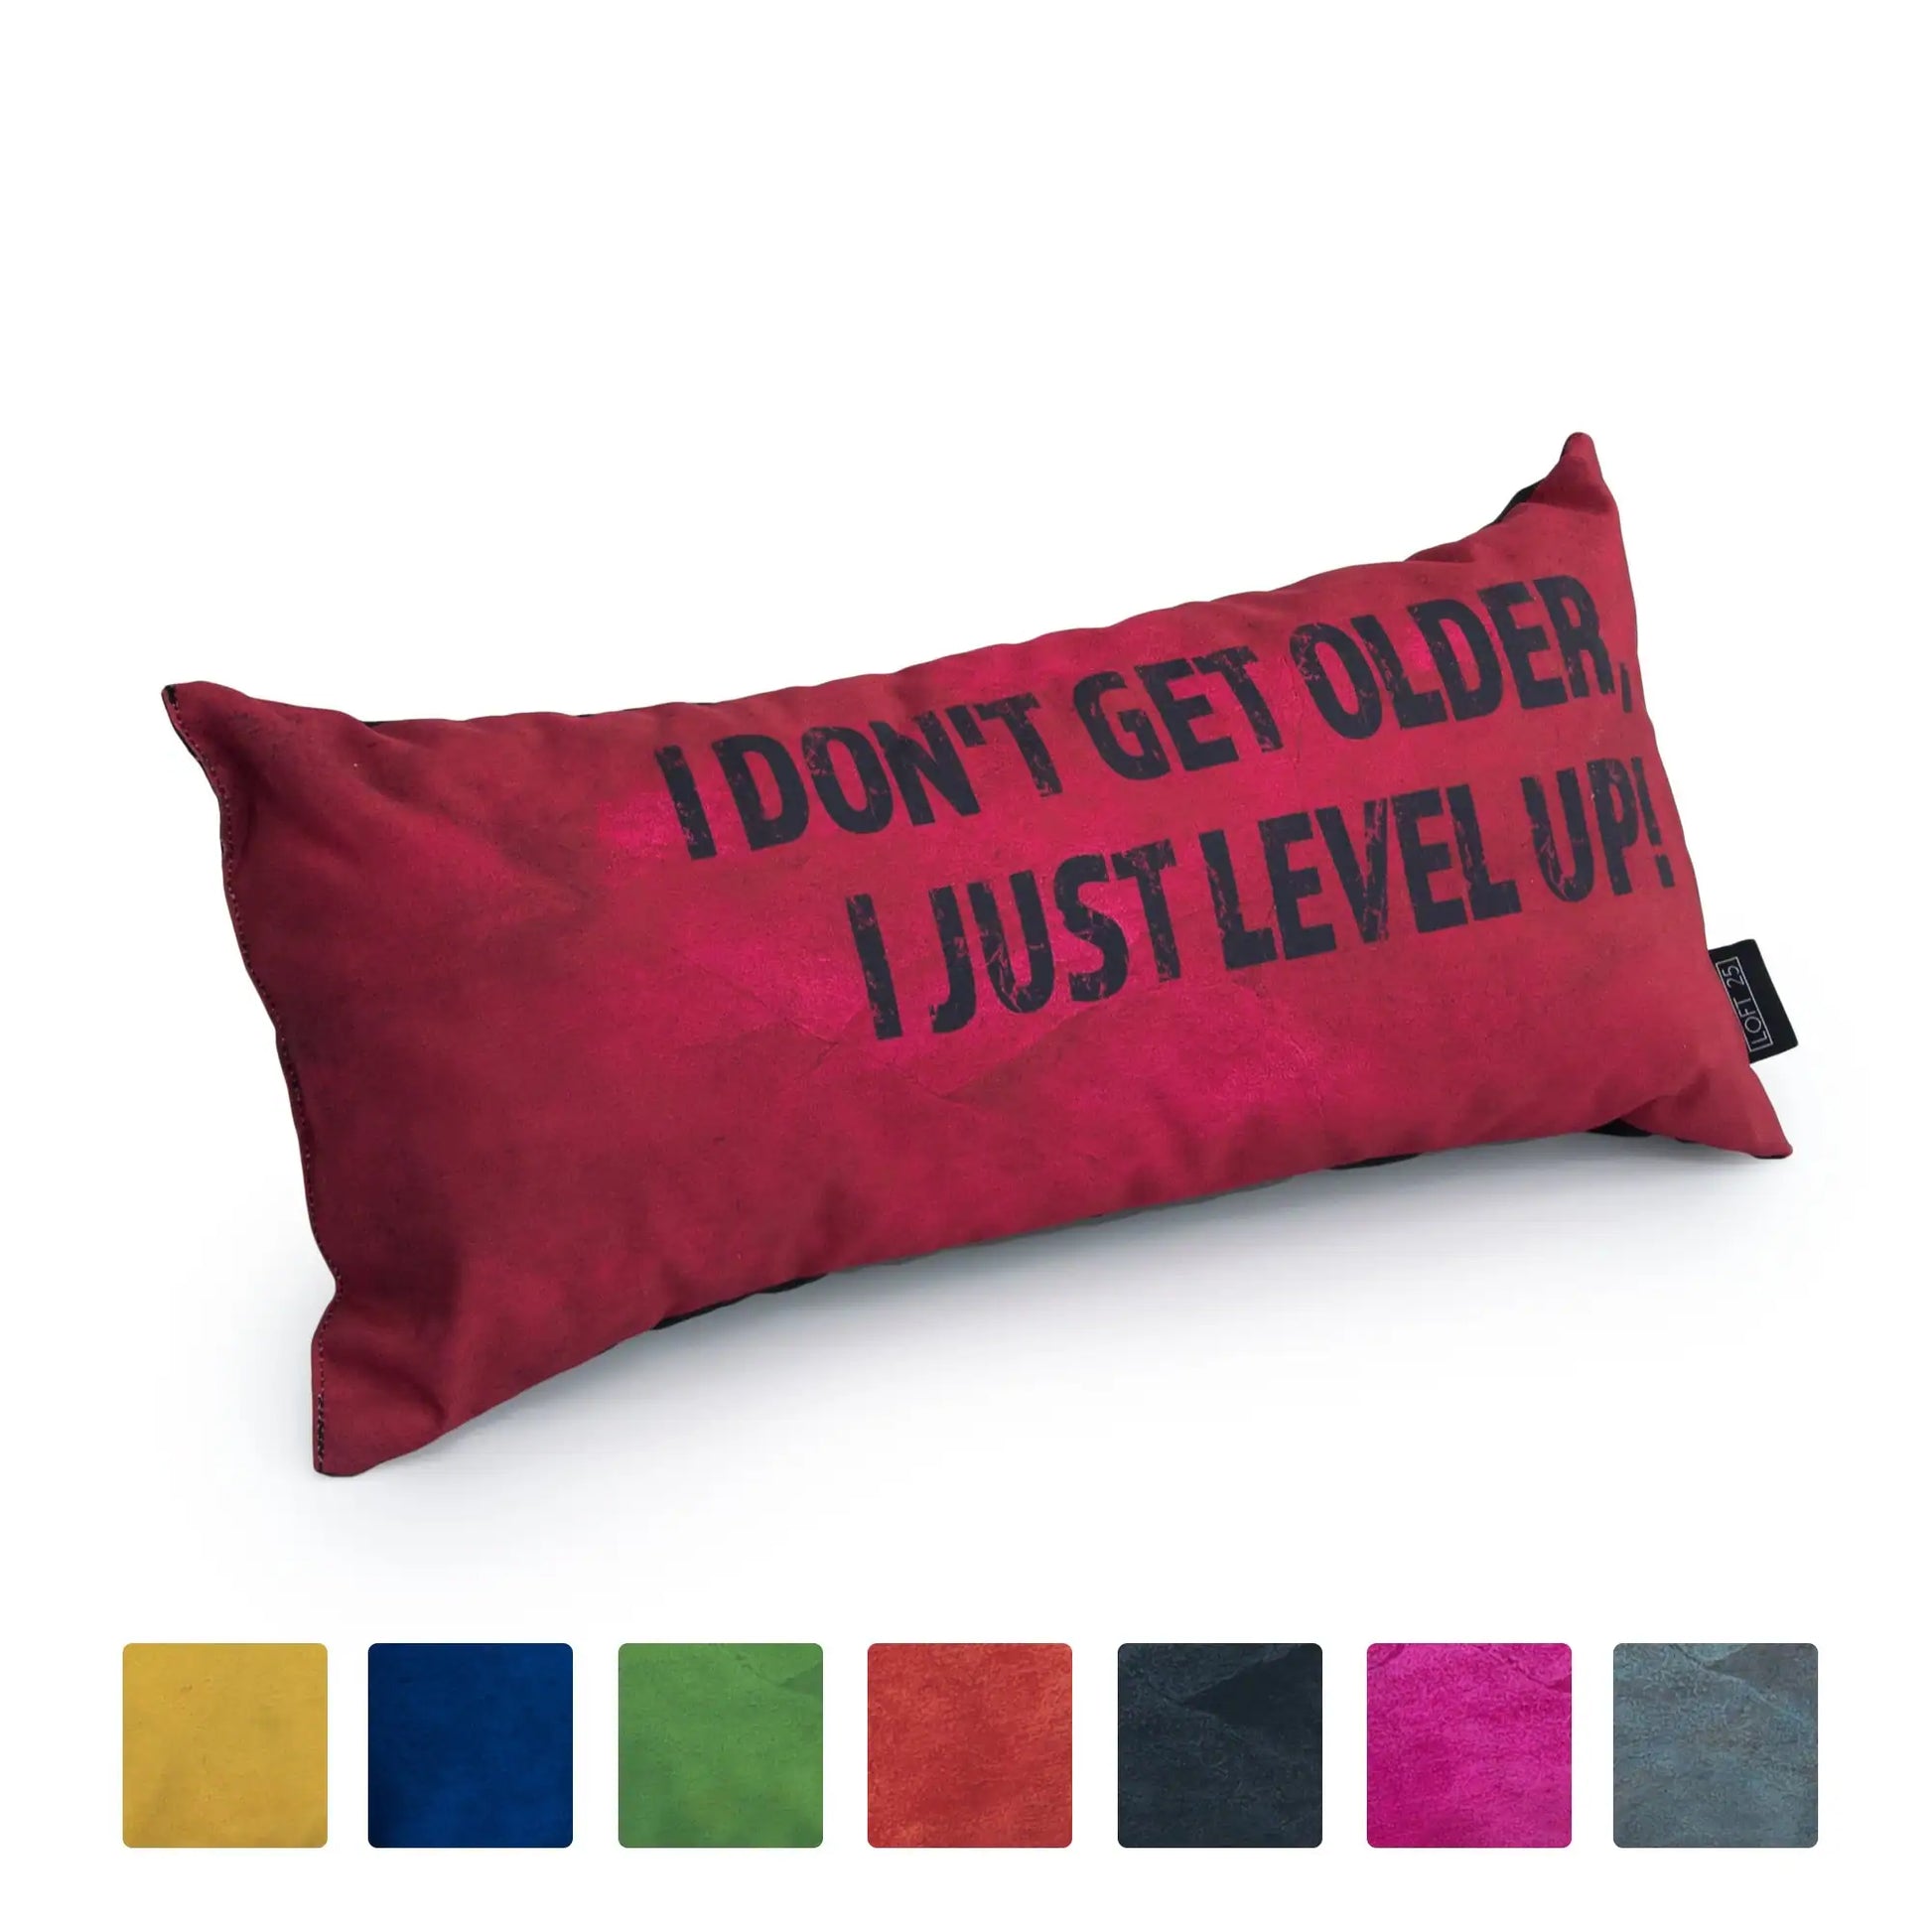 A red rectangular pillow with the text "I don't get older, I just level up."